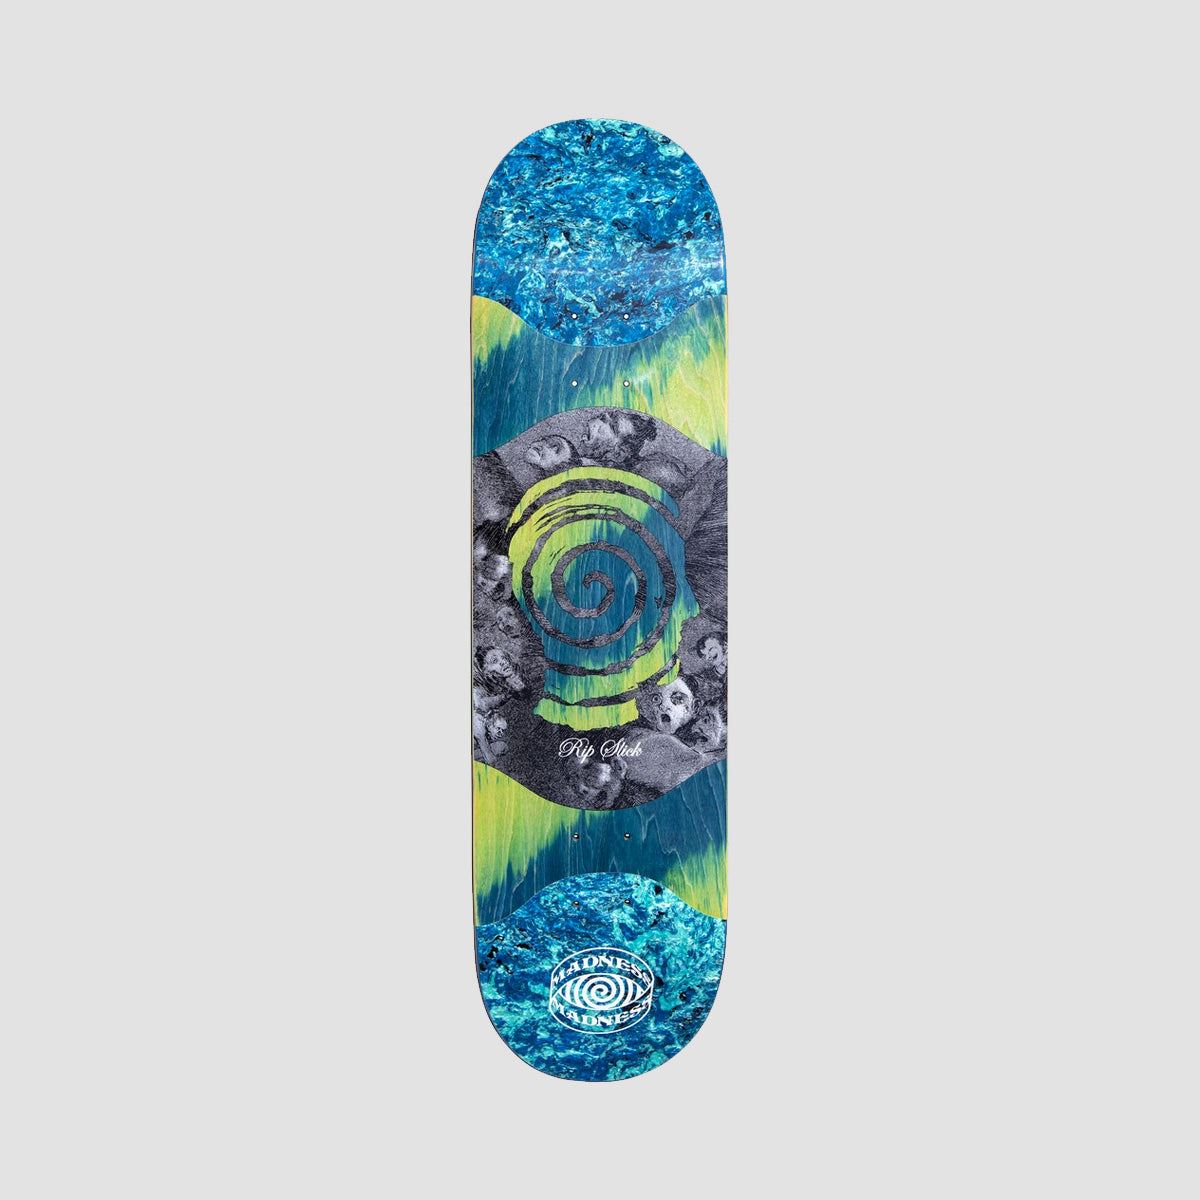 Madness Voices R7 Rip Slick On Tail and Nose Skateboard Deck Blue/Green - 8.125"